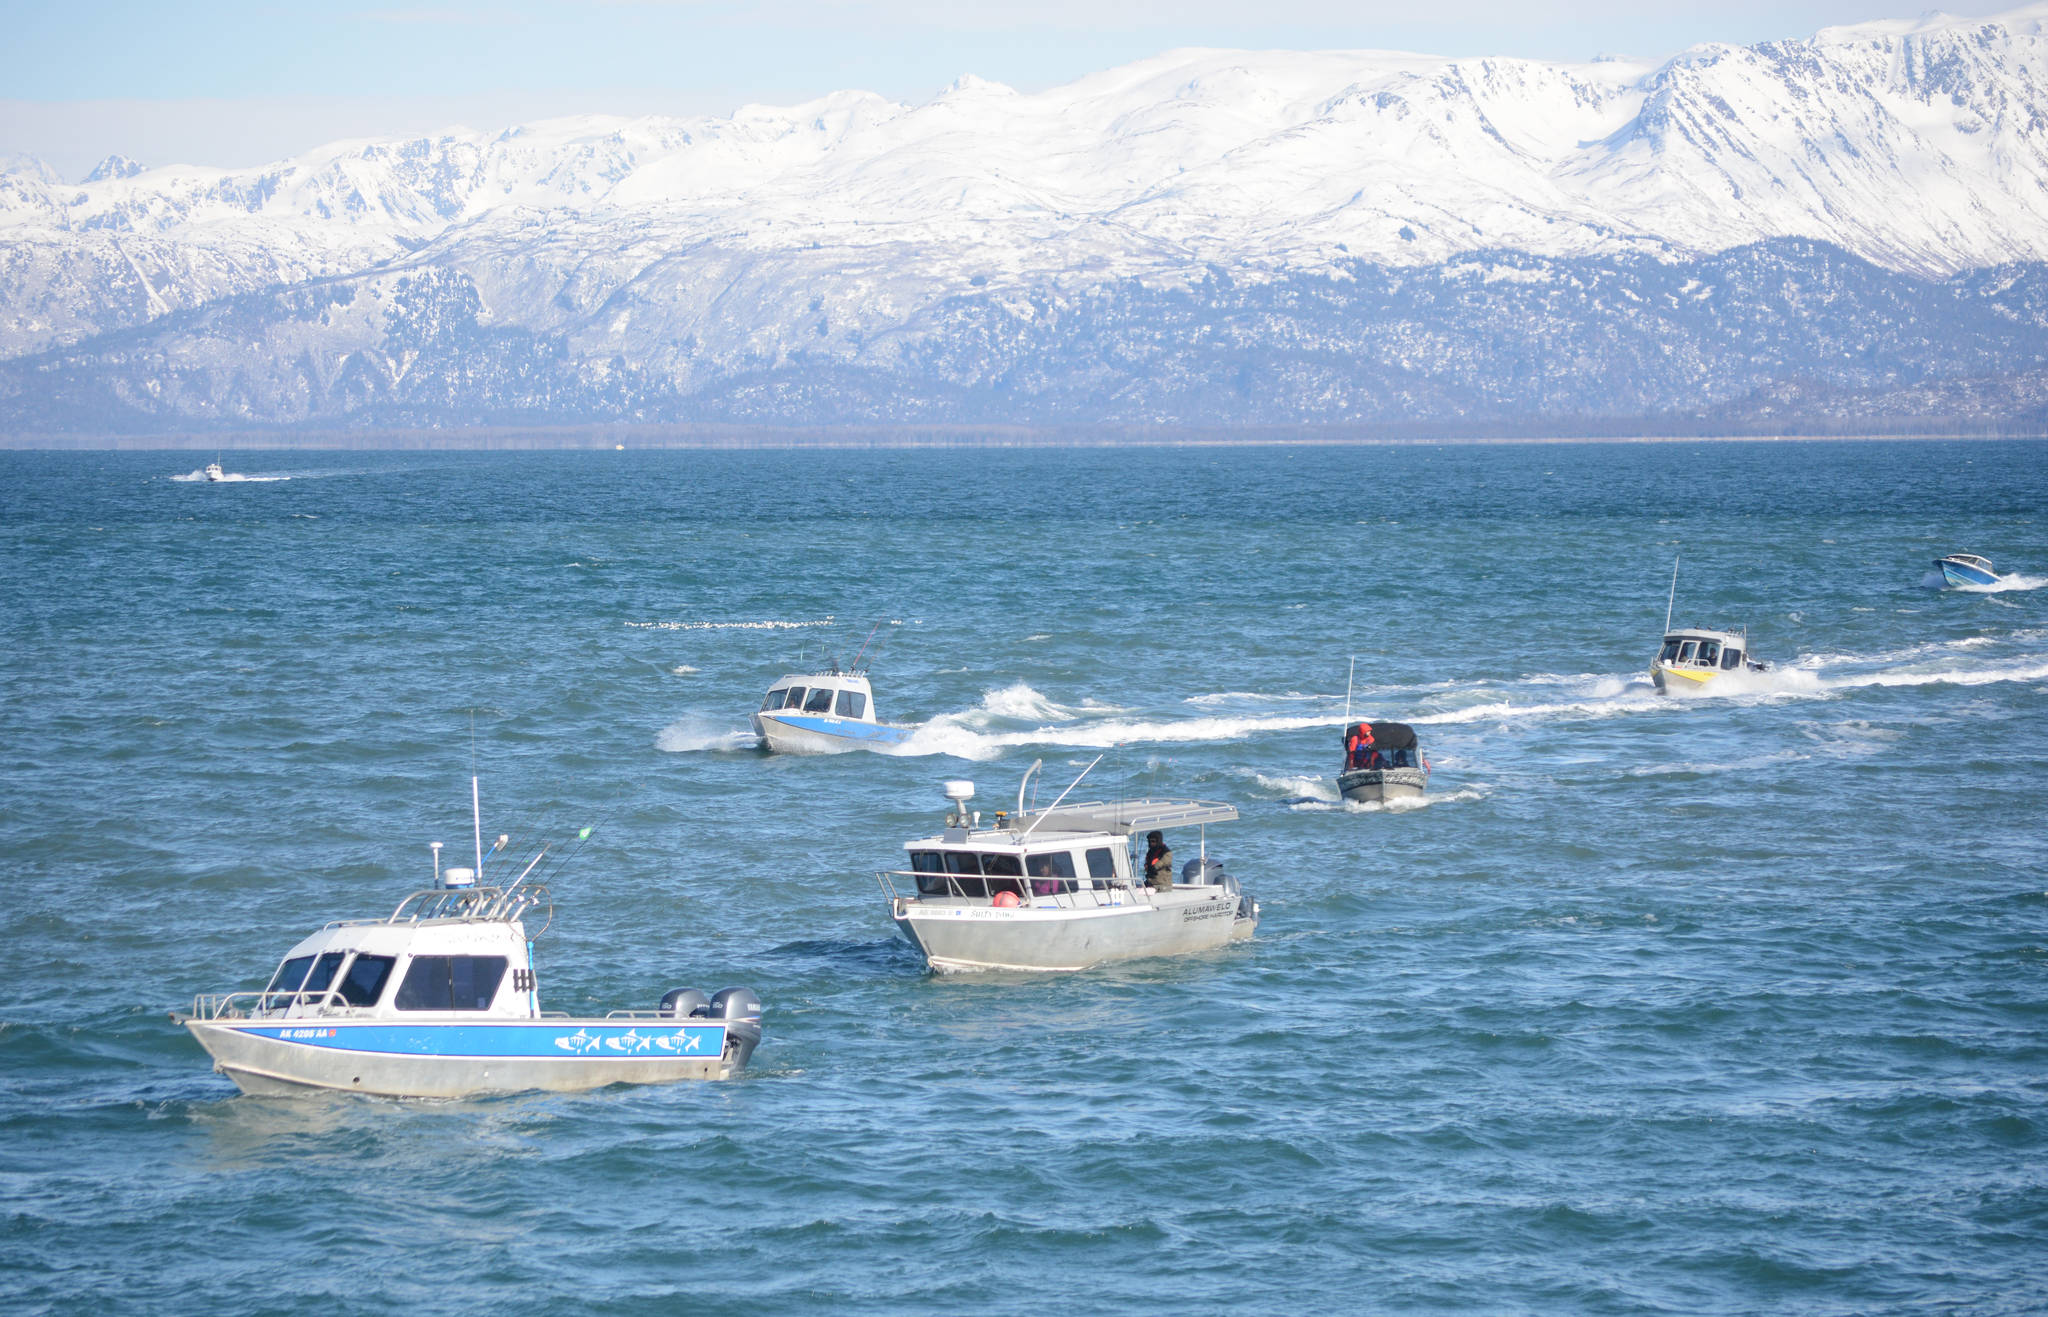 Boats return to the Homer Harbor on Saturday after the end of the 24th annual Homer Winter King Tournament on March 23, 2017. One-thousand and 12 anglers registered in the tournament in 314 boats, catching 110 king salmon weighing 1,584 pounds total. Anglers also caught 27 white kings weighing 438 pounds total. (Photo by Michael Armstrong, Homer News)